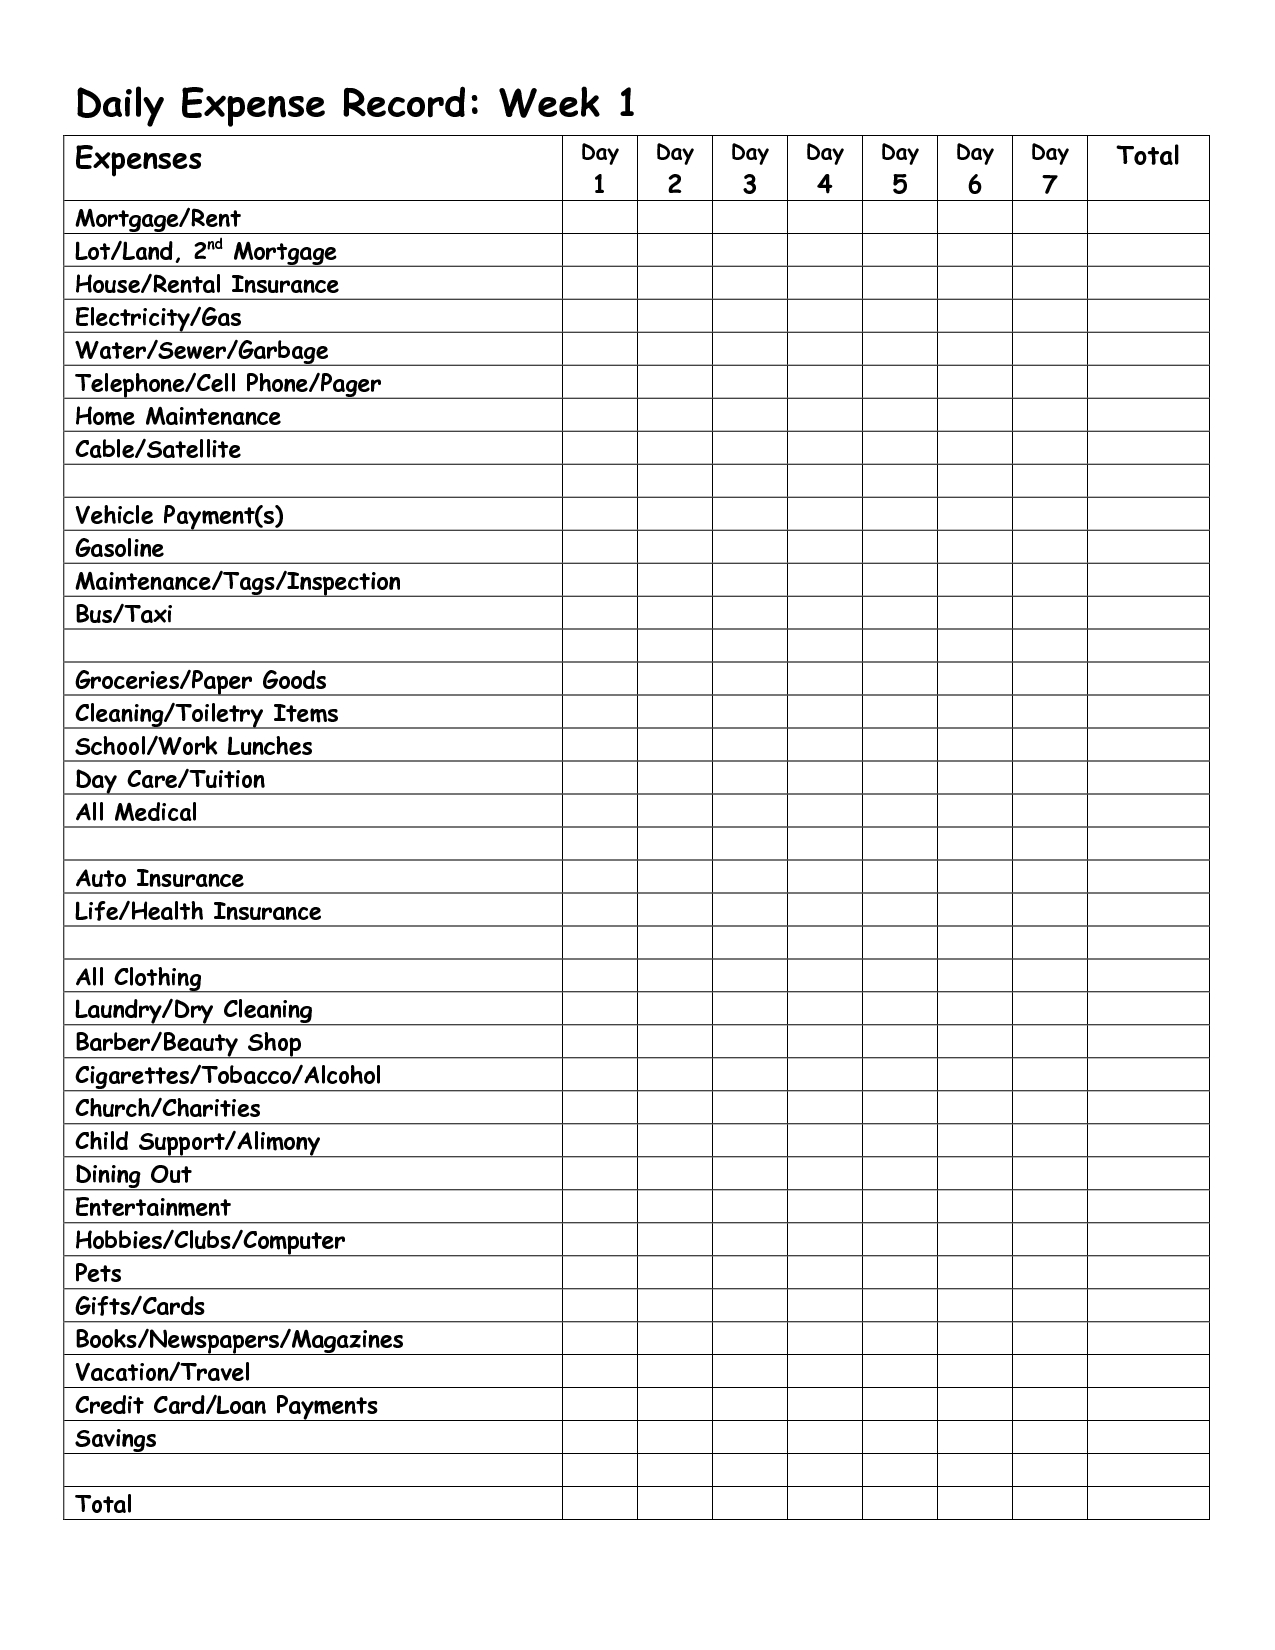 Monthly Expense Report Template | Daily Expense Record Week Throughout Cleaning Report Template